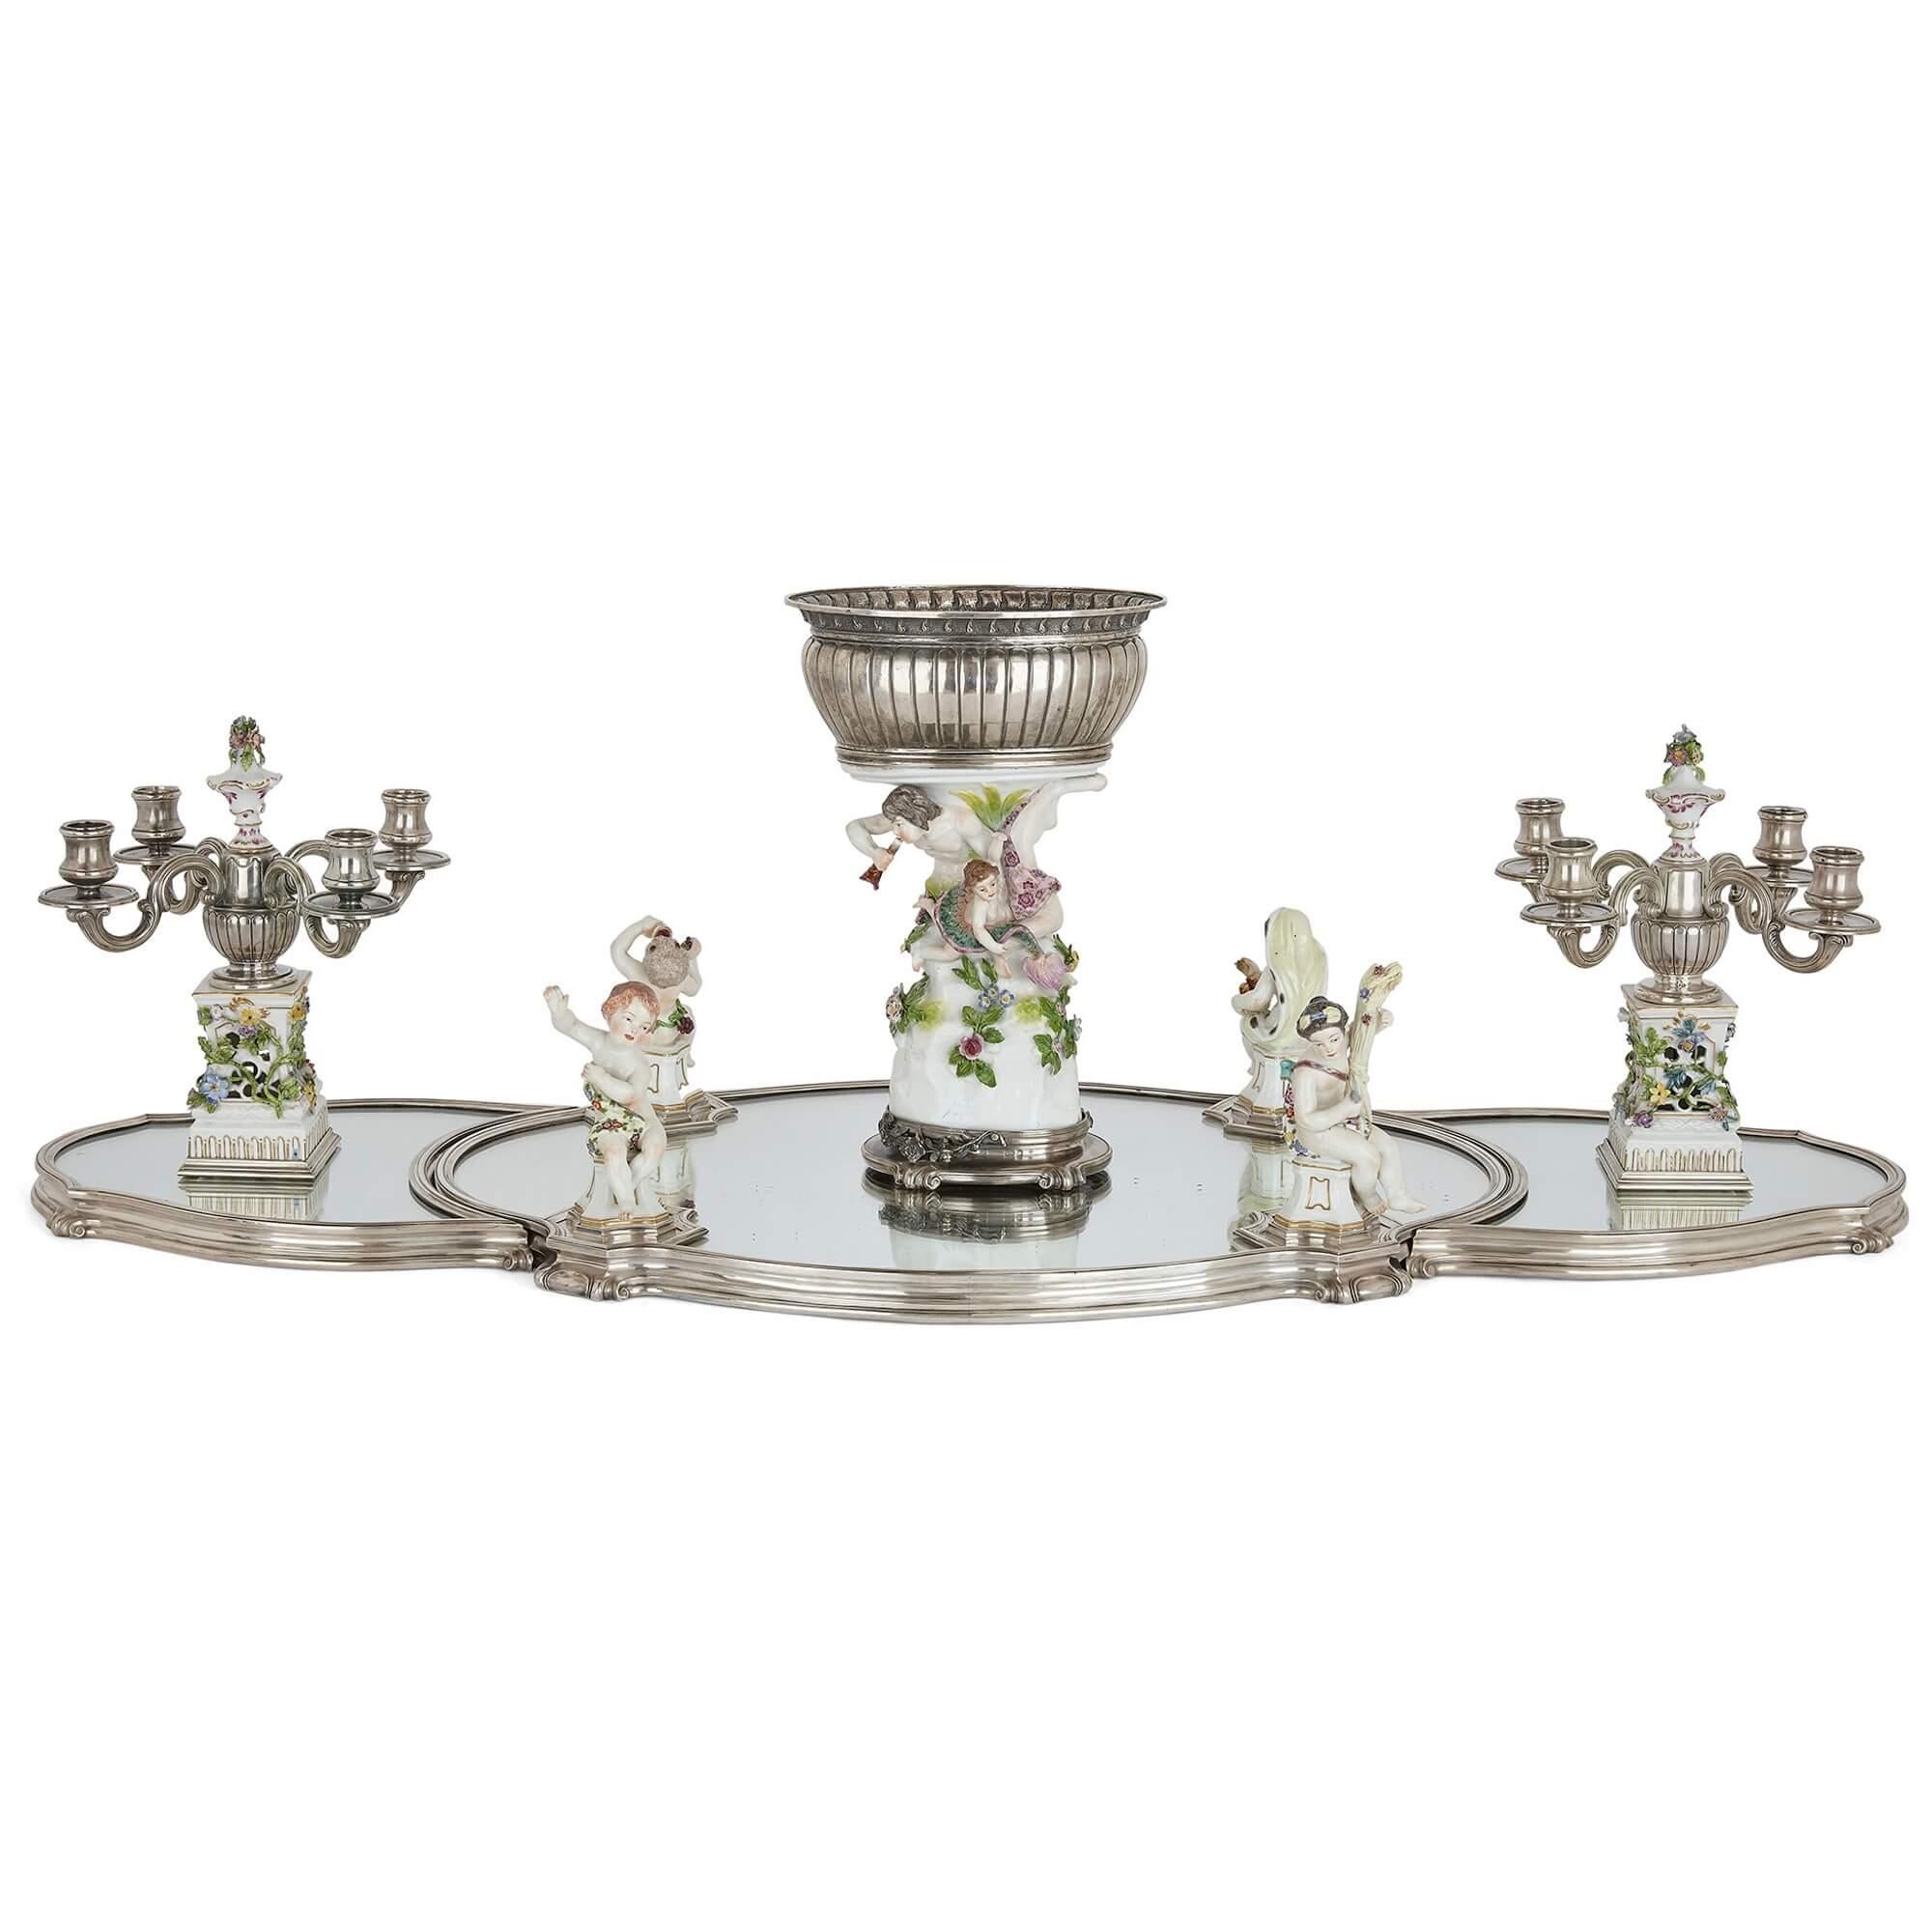 French porcelain and silver centrepiece suite by Tétard and Samson
French, early 20th Century
Tray: Height 3.5cm, width 117cm, depth 43cm
Central comport: Height 35.5cm, width 23cm, depth 17cm

This very fine centrepiece surtout is crafted from